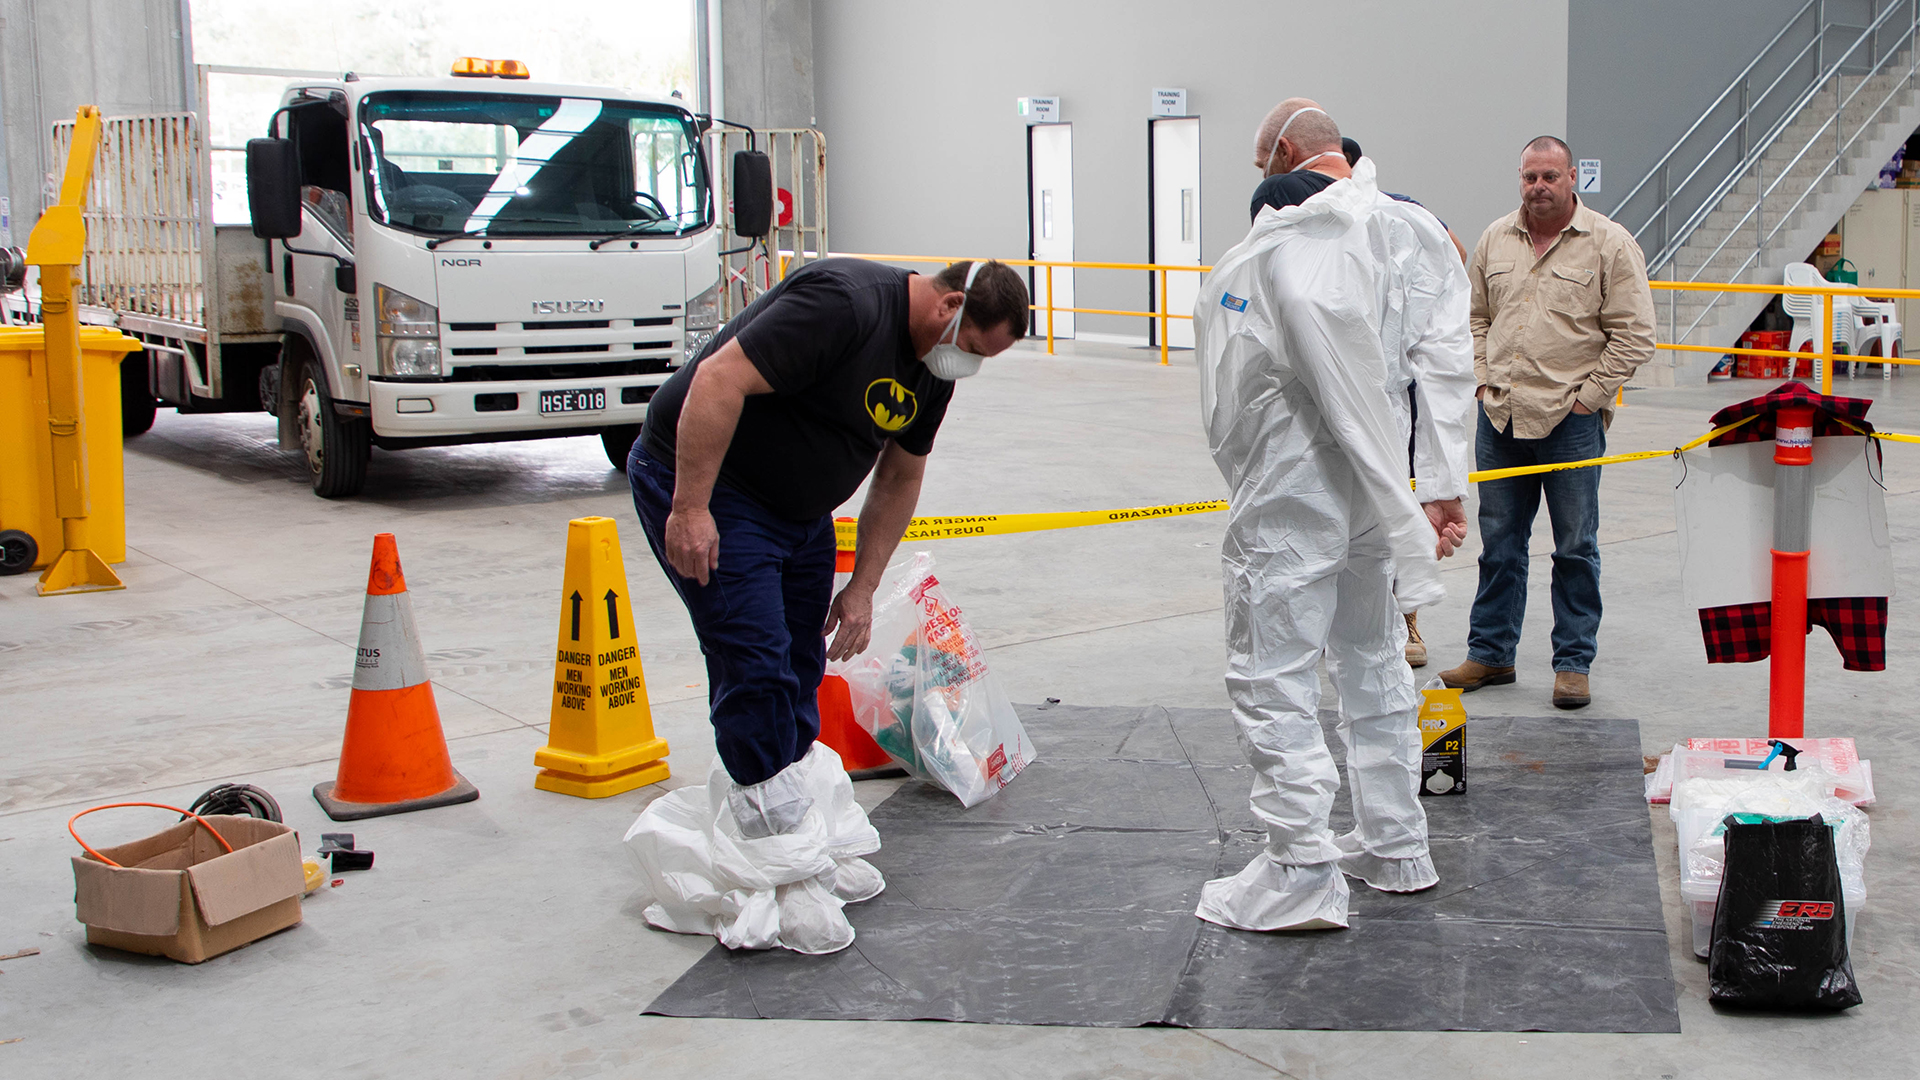 Training participants decontaminating themselves following asbestos removal.